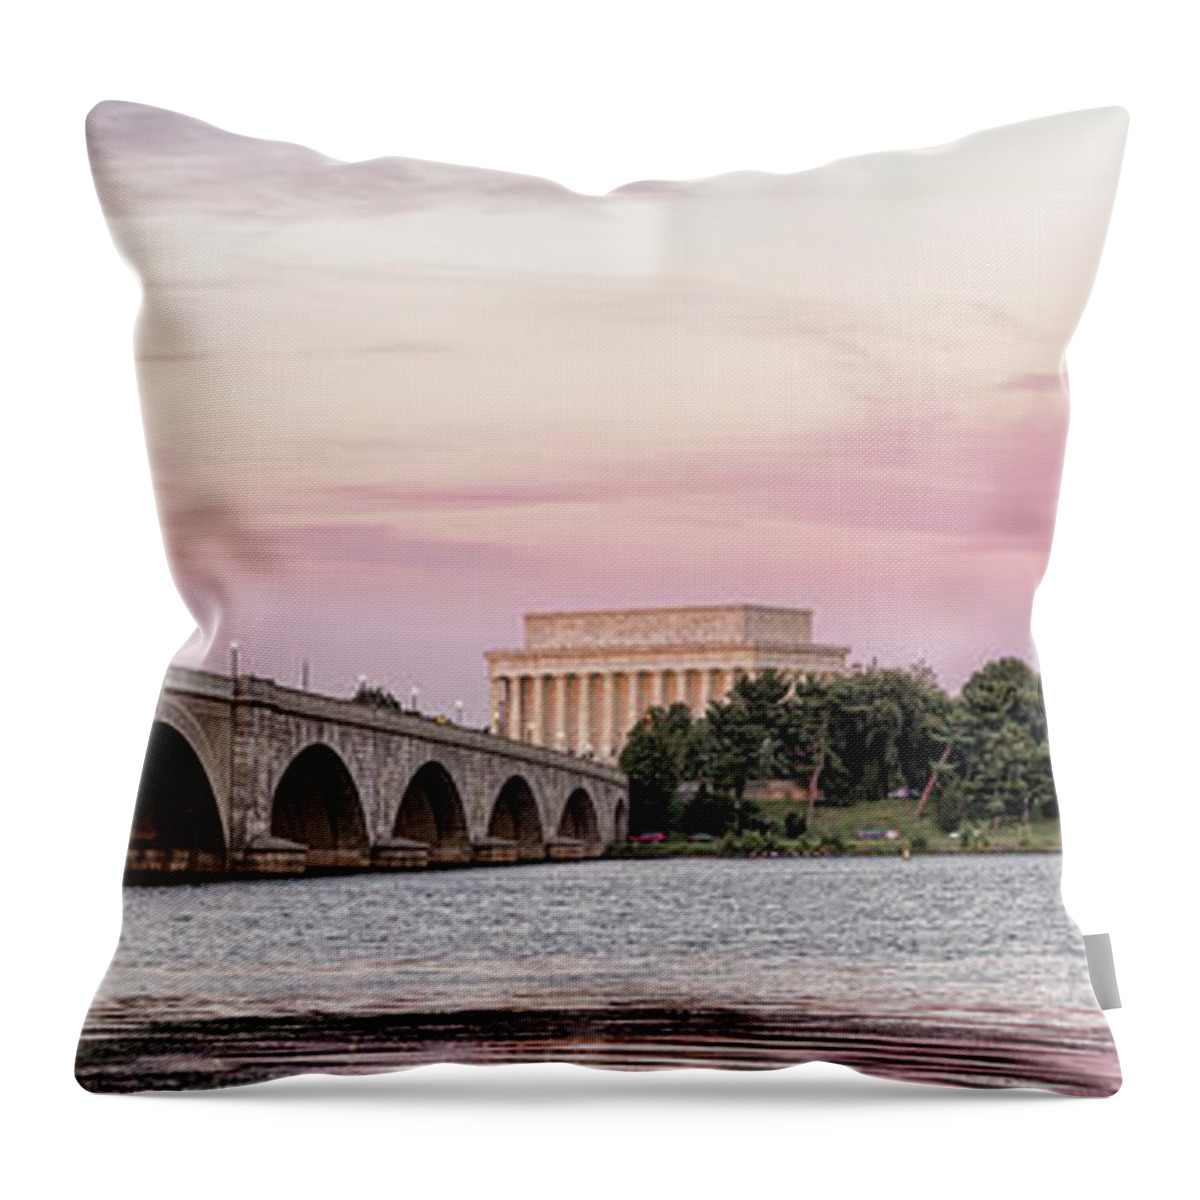 Photography Throw Pillow featuring the photograph Arlington Memorial Bridge With Lincoln by Panoramic Images